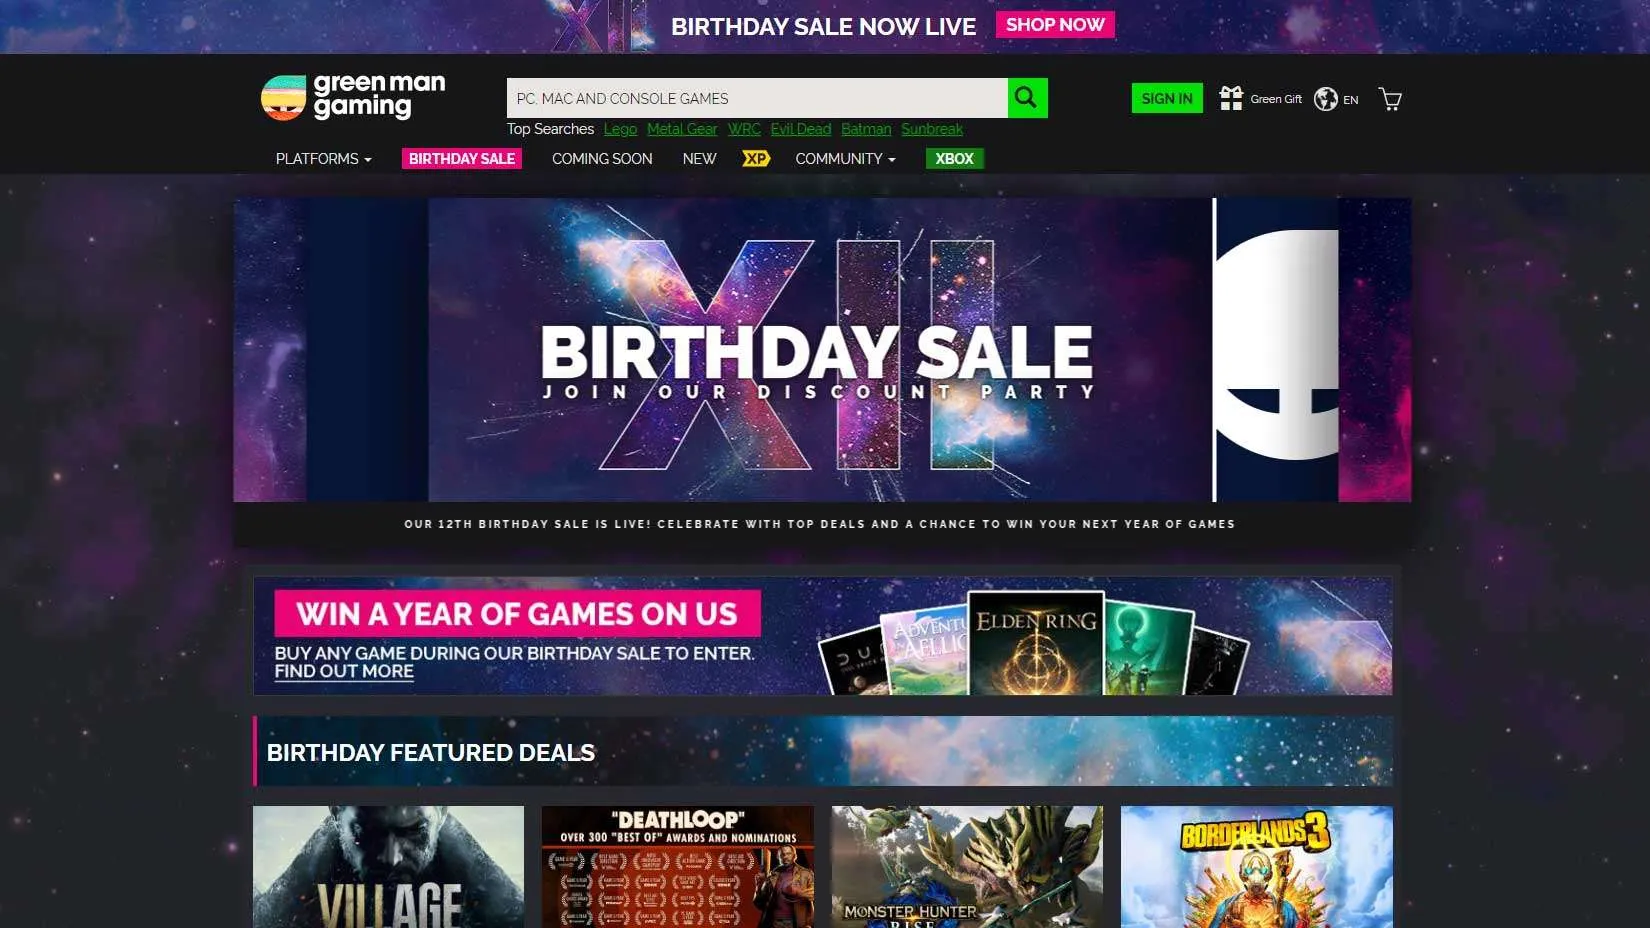 Green Man Gaming 12th Birthday Sale features over 2,000 PC games up to 90% off
